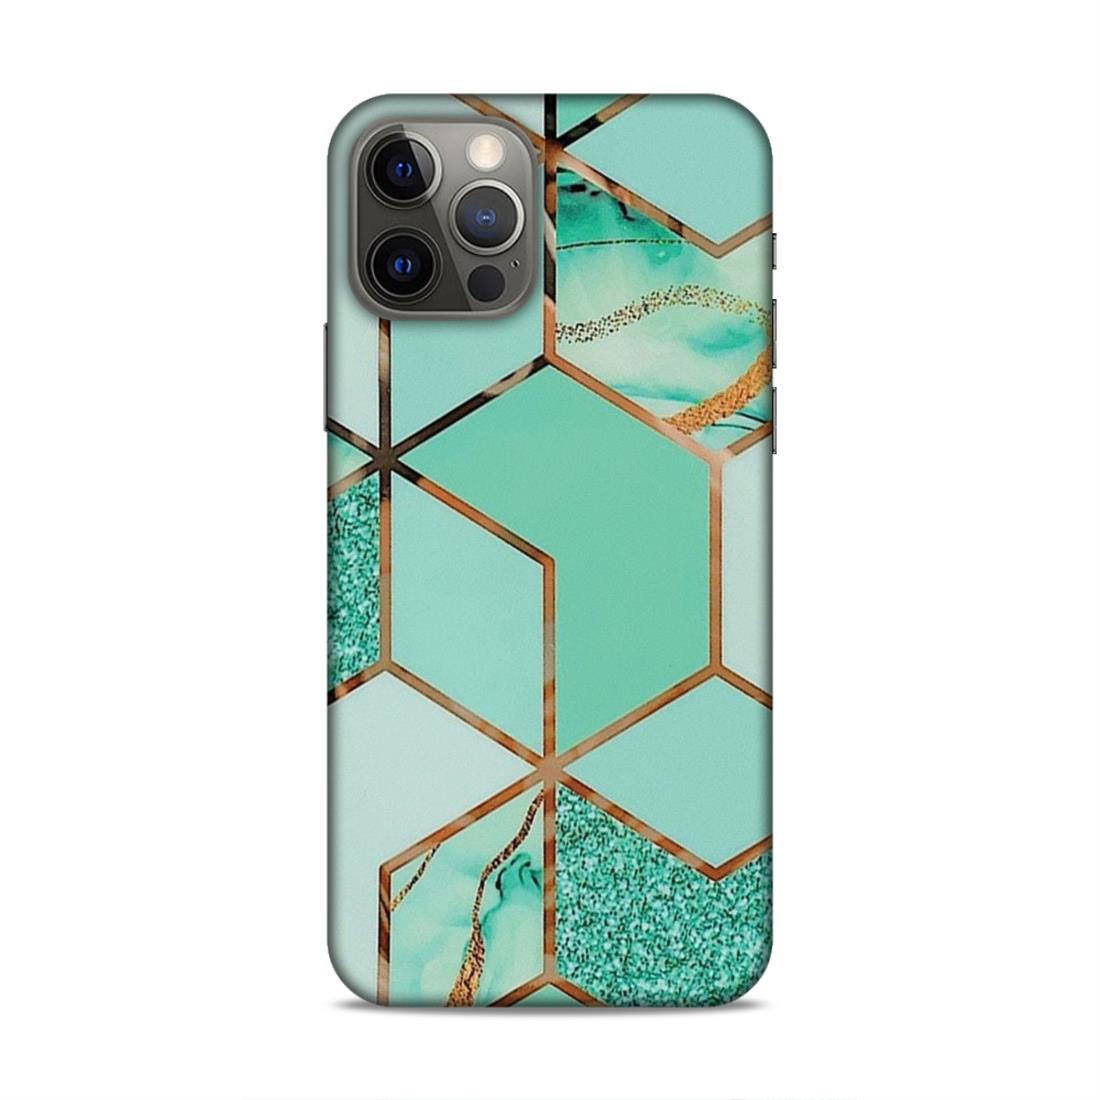 Hexagonal Marble Pattern Hard Back Case For Apple iPhone 12 / 12 Pro